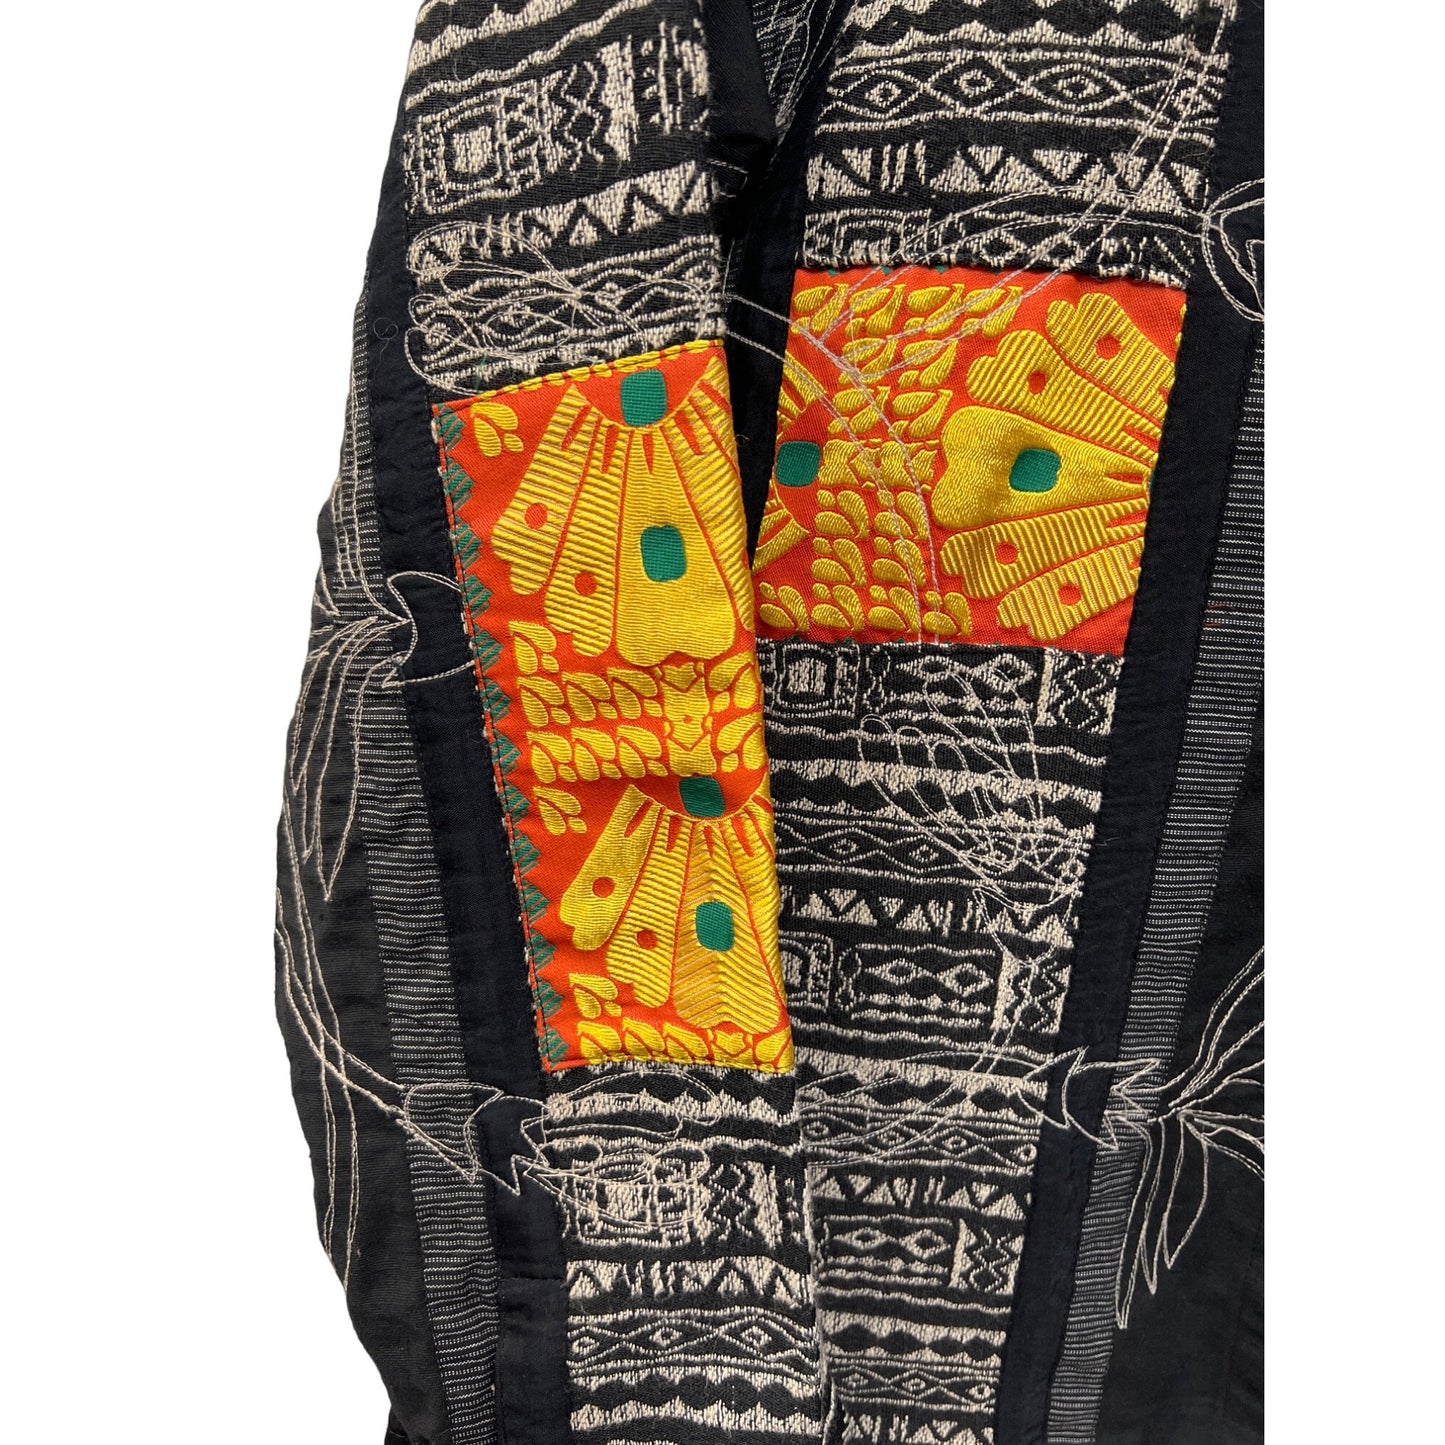 Chico's Design Vintage Embroidery Patchwork Tapestry Jacket